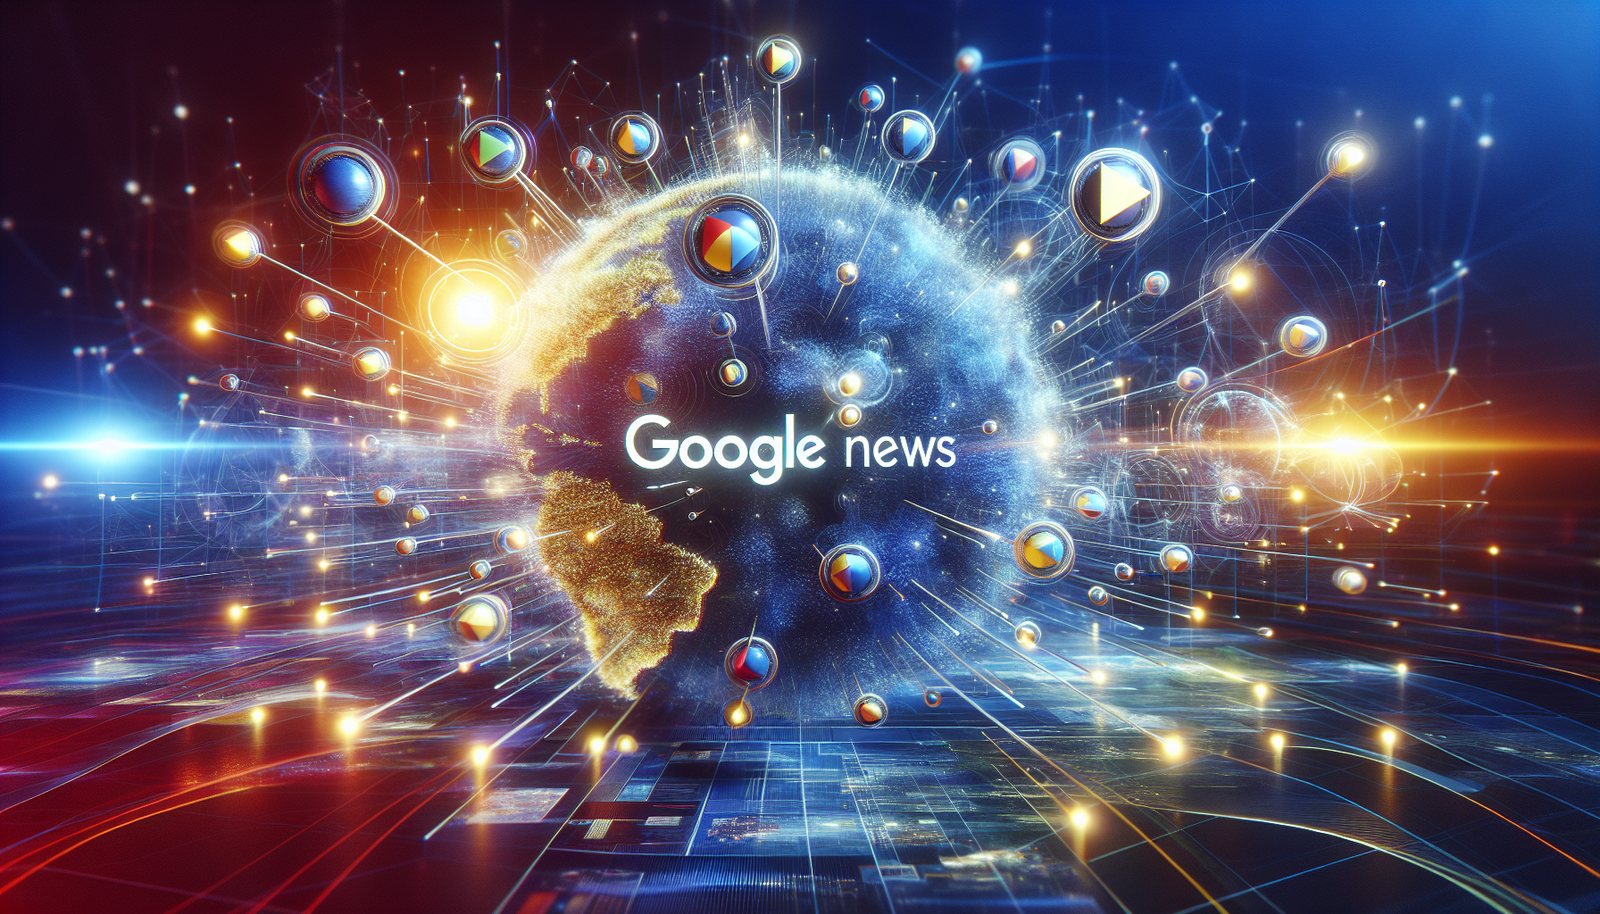 Google News: Get the Scoop on the Latest Stories